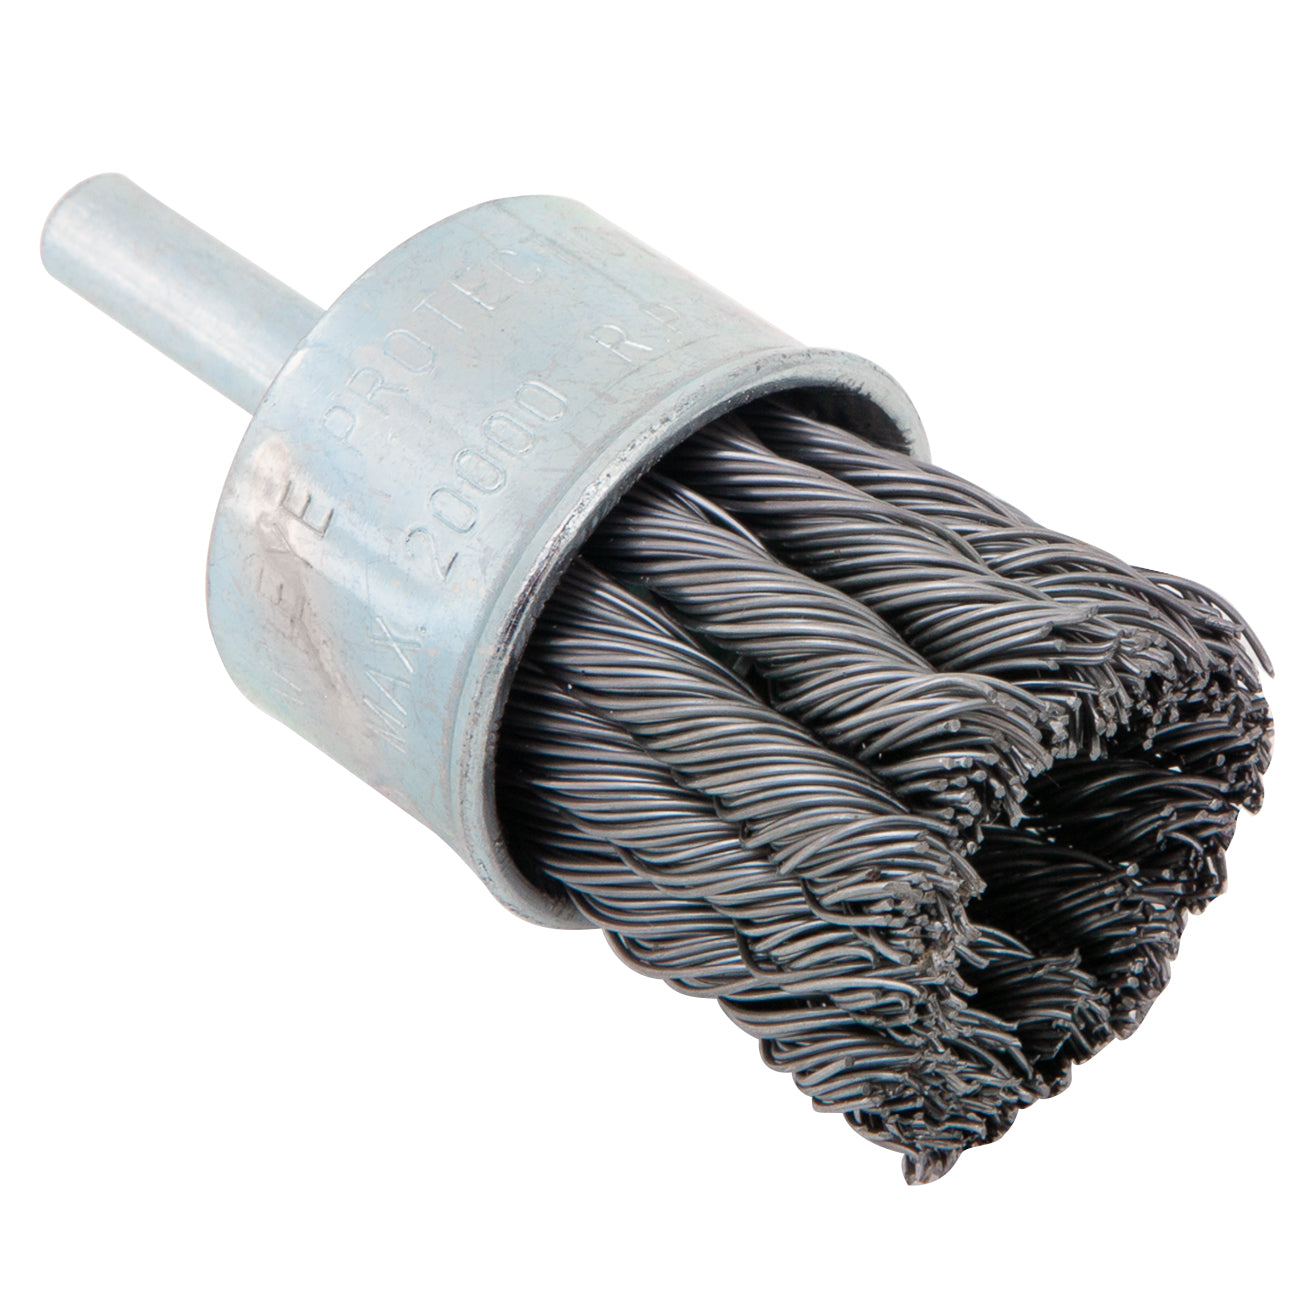 Knotted End Wire Brush 1-1/8” With ¼" Shank 22000RPM